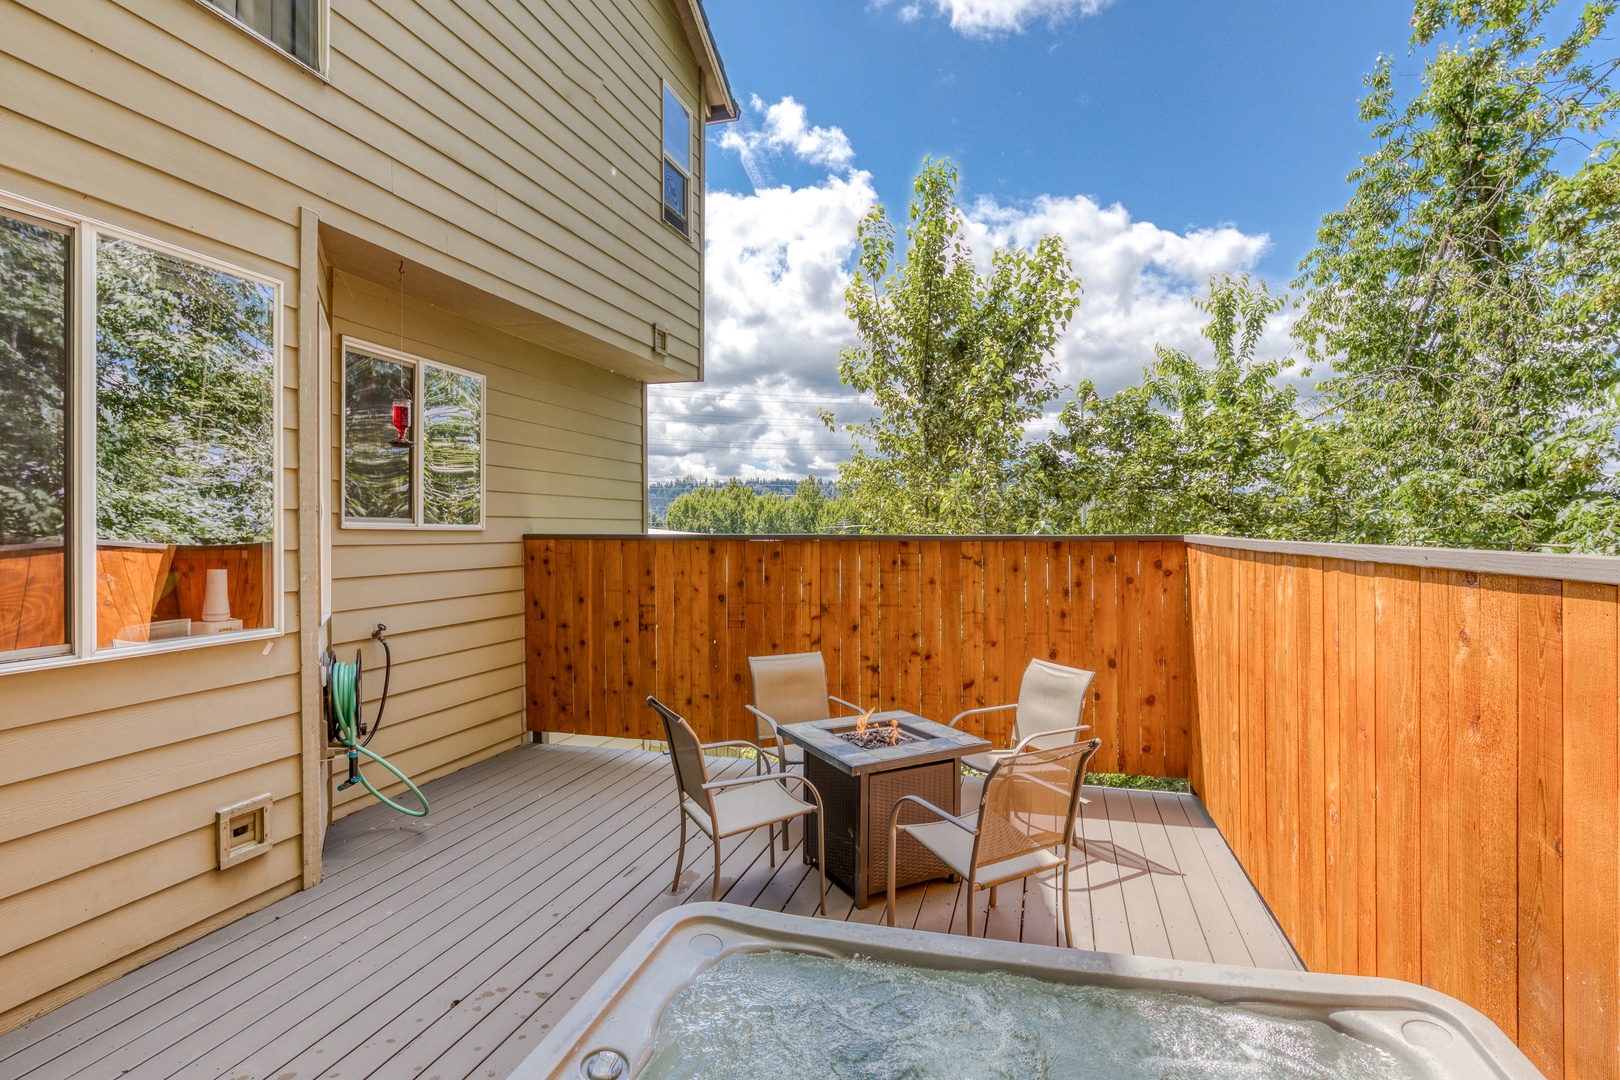 Clackamas Vacation Rentals, Duck Crossing - It's easy to chat with your friends and family from the hot tub to the fire pit